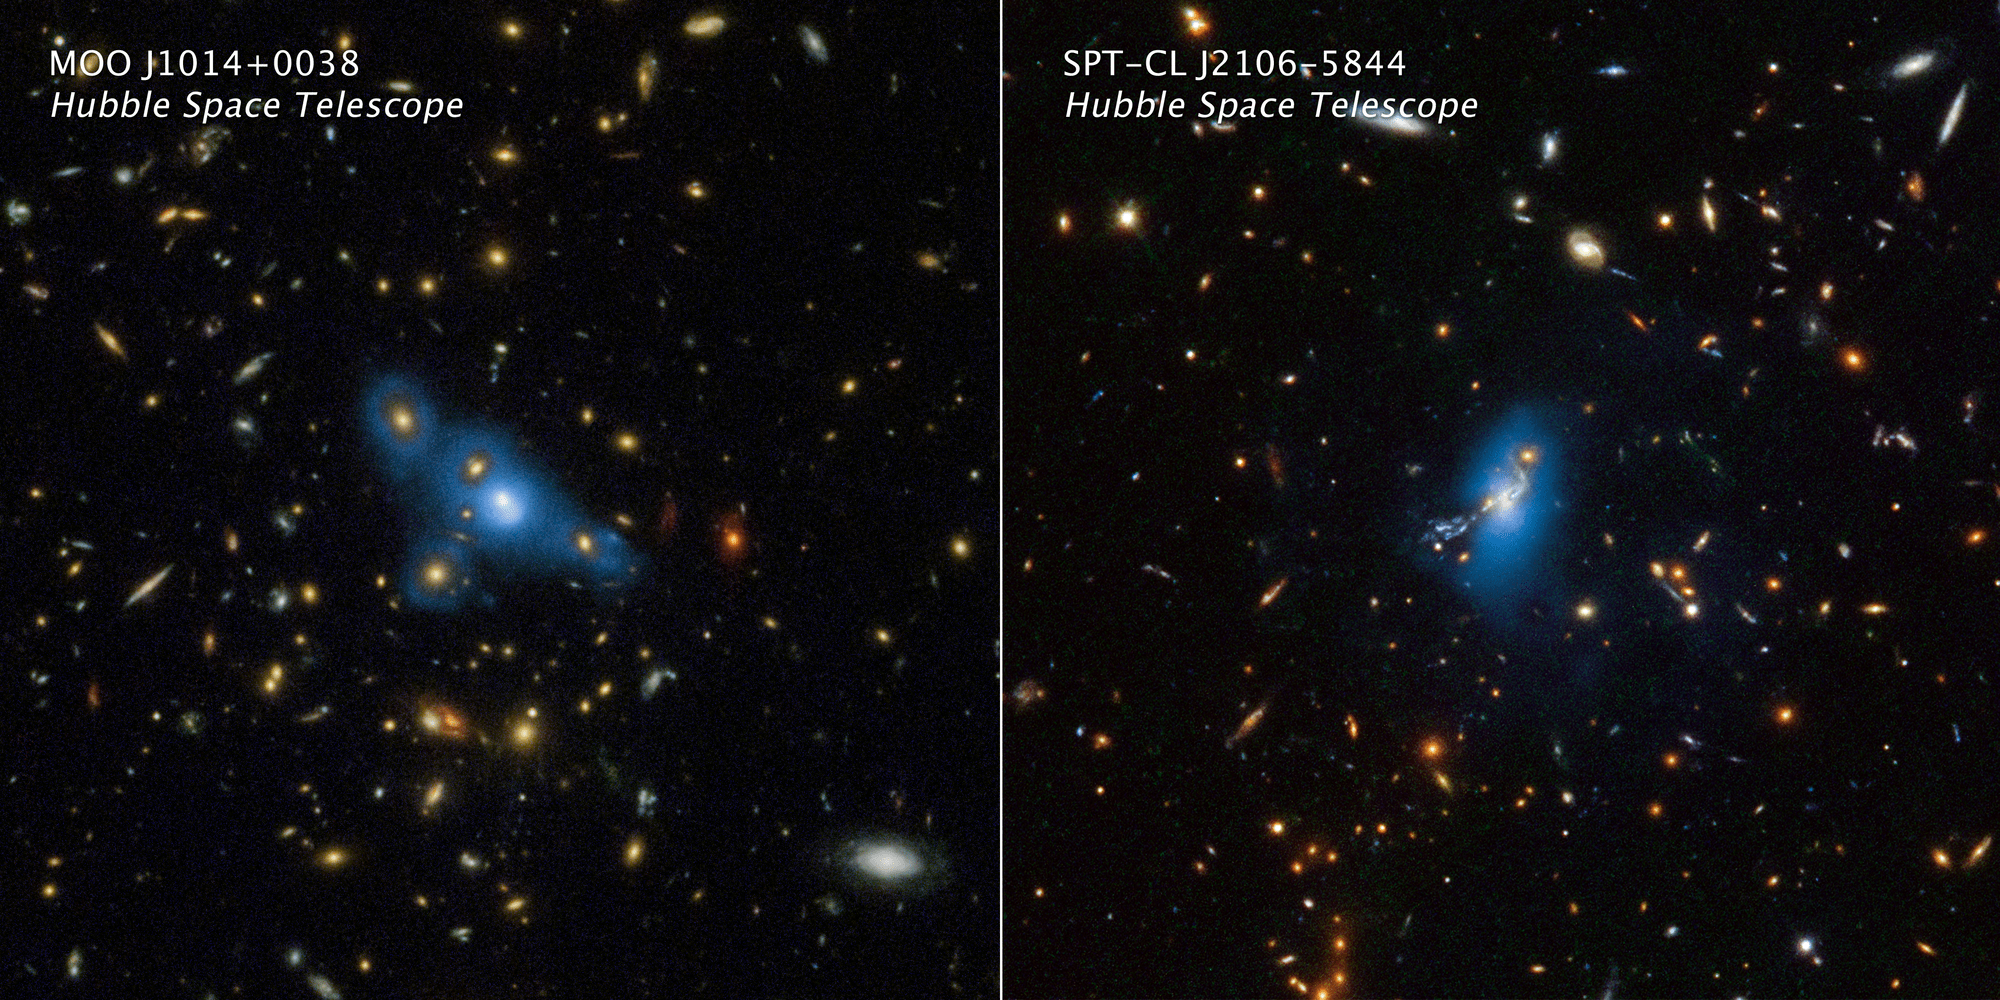 Two images. Left: yellow-orange galaxies, in blue halo (intracluster light). Right: 2 elongated blueish, irregular-shaped objects, several small yellow-orange galaxies. Between 2 elongated objects: bright spot in a blue halo (intracluster light).